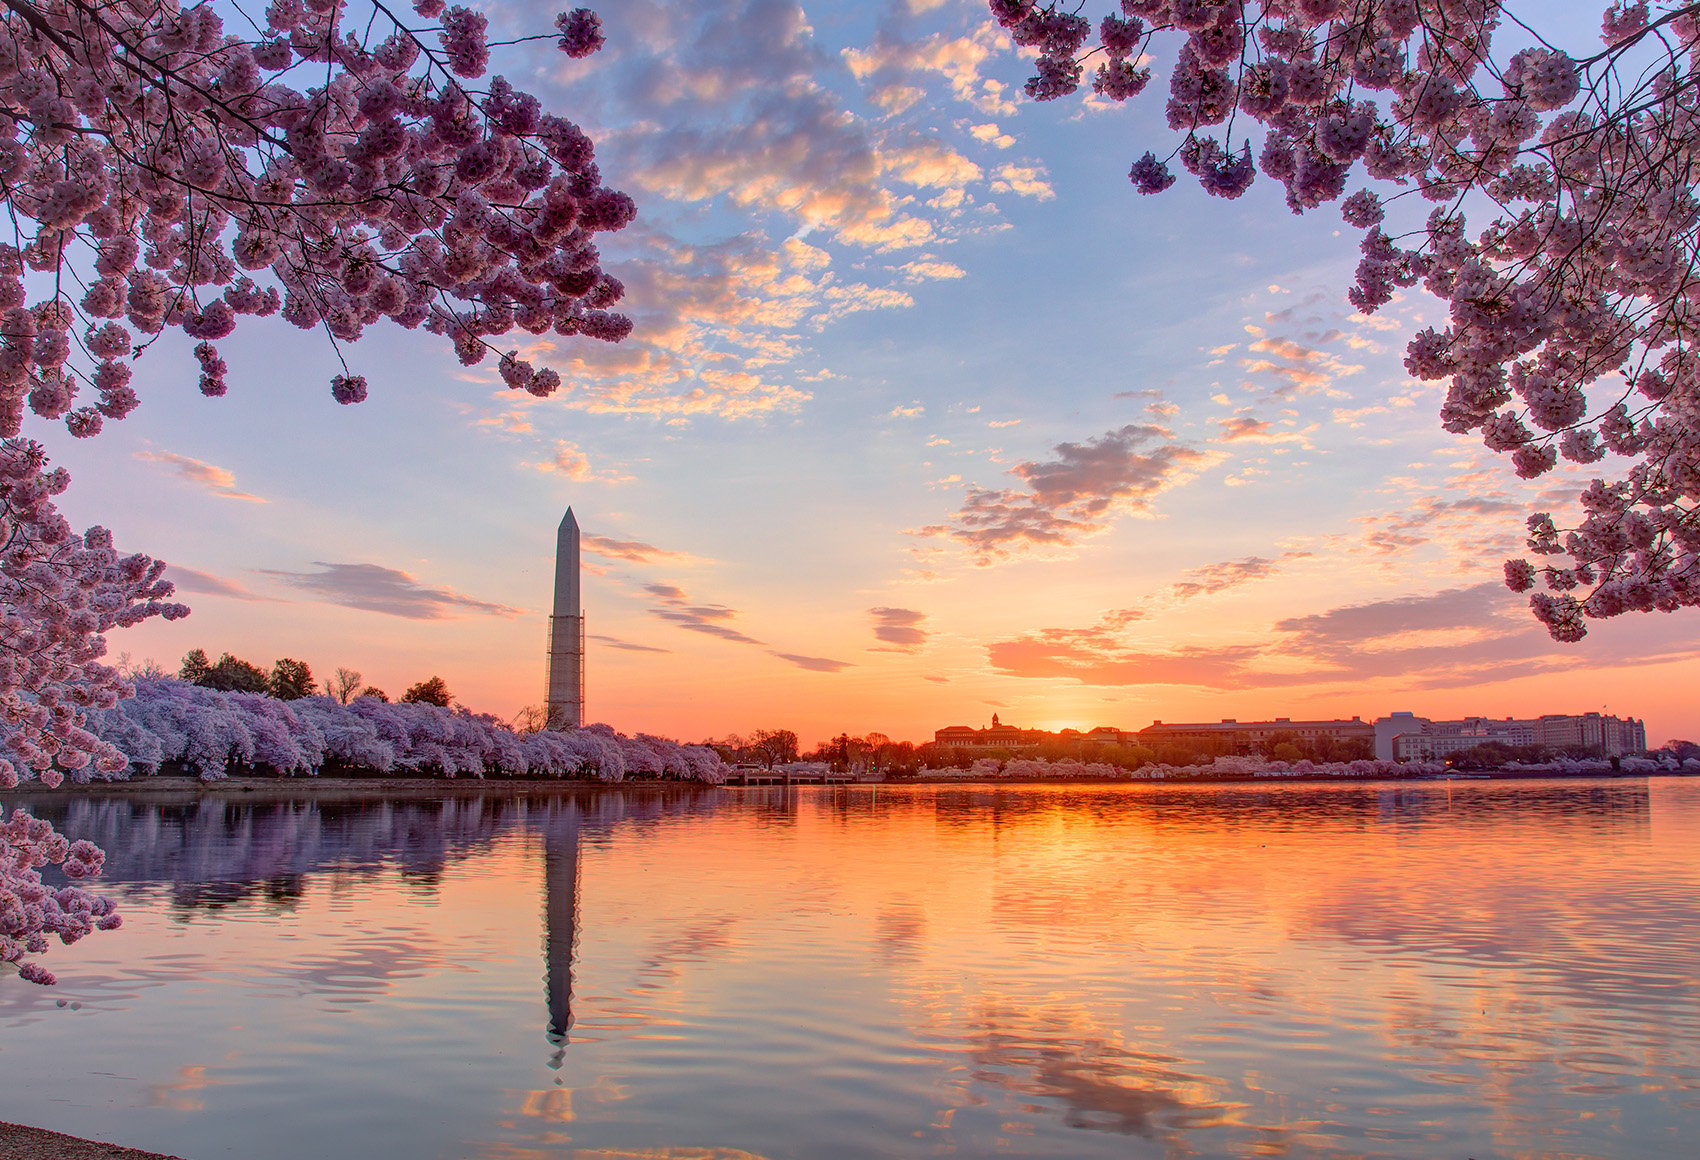 View of the Tidal Basin and Washington Monument in Washington DC with cherry blossoms